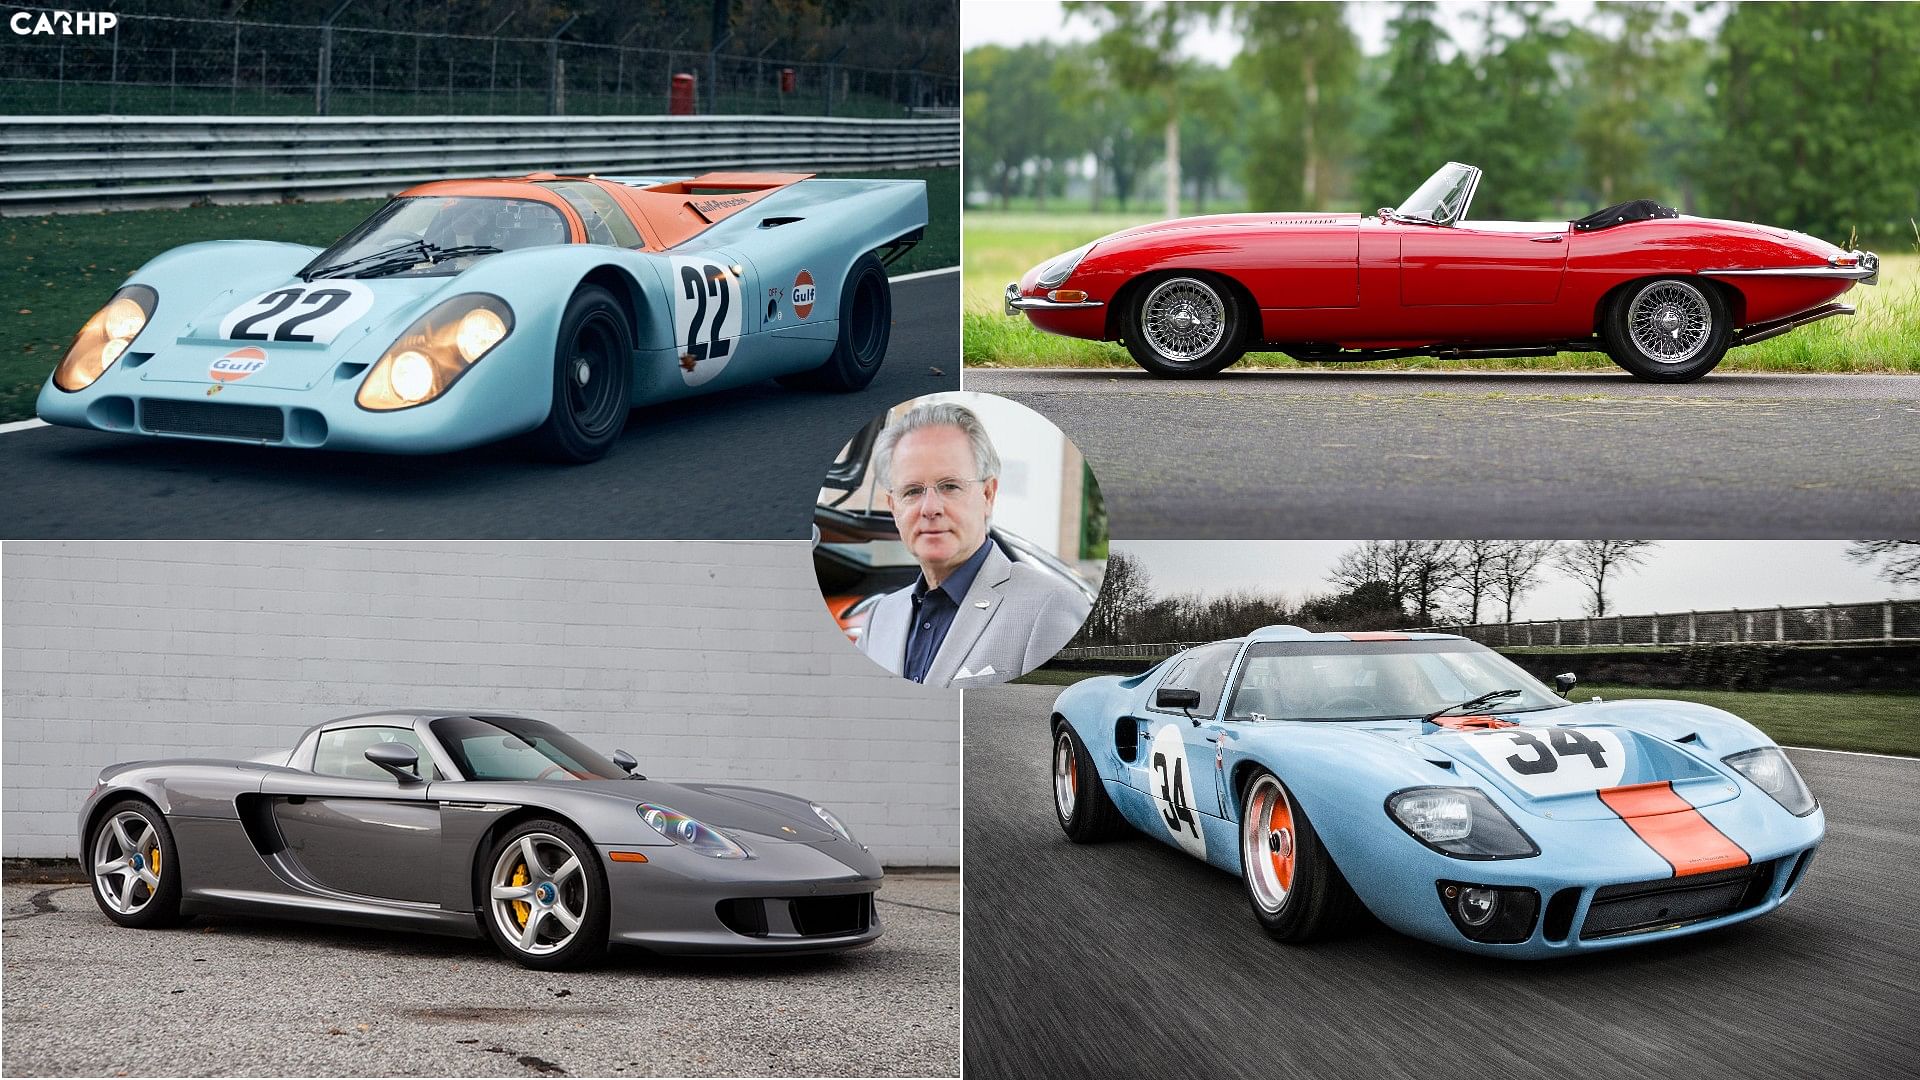 Here is The Latest Multi-Million Dollar Car Collection of Horacio Pagani